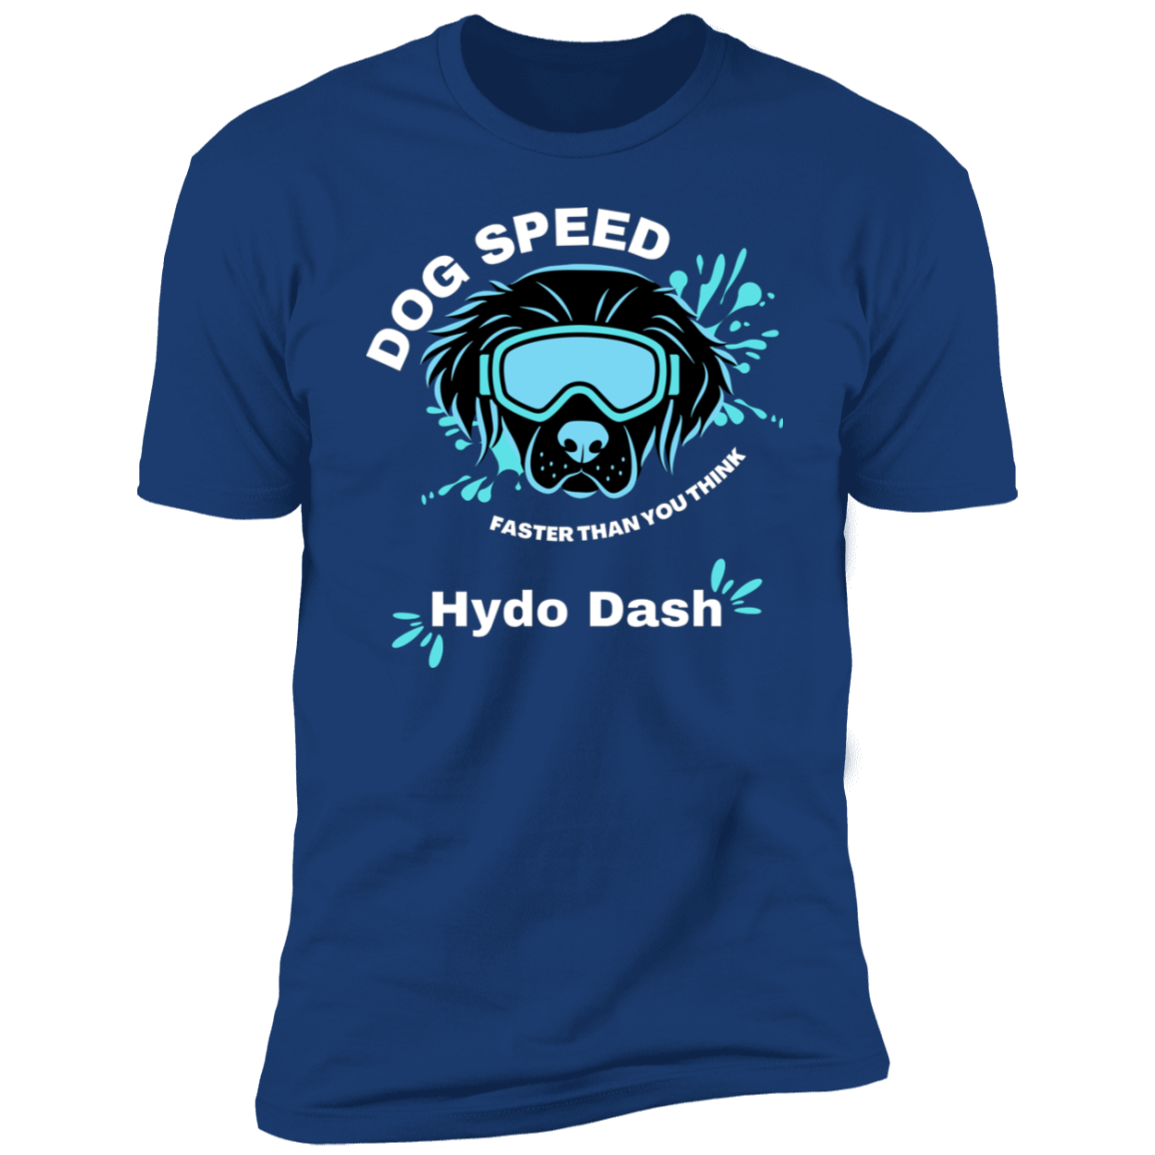 Dog Speed Faster Than You Think Hydro Dash T-shirt, Hydro Dash shirt dog shirt for humans, in royal blue